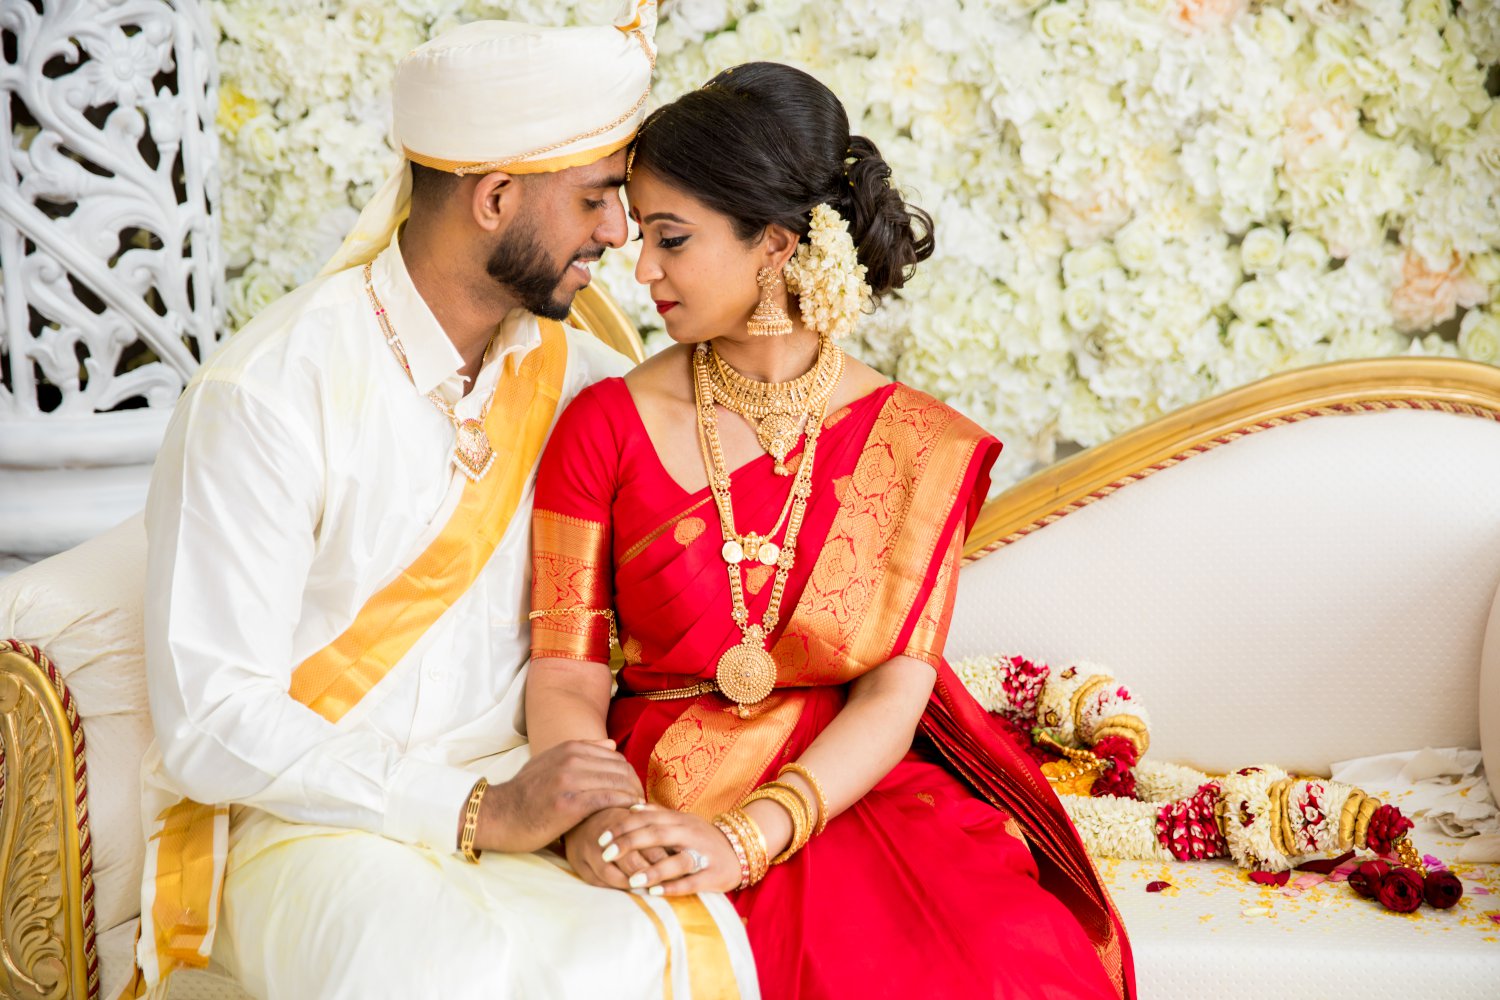 Bride and groom in traditional Hindu wedding garments posing on a love seat.